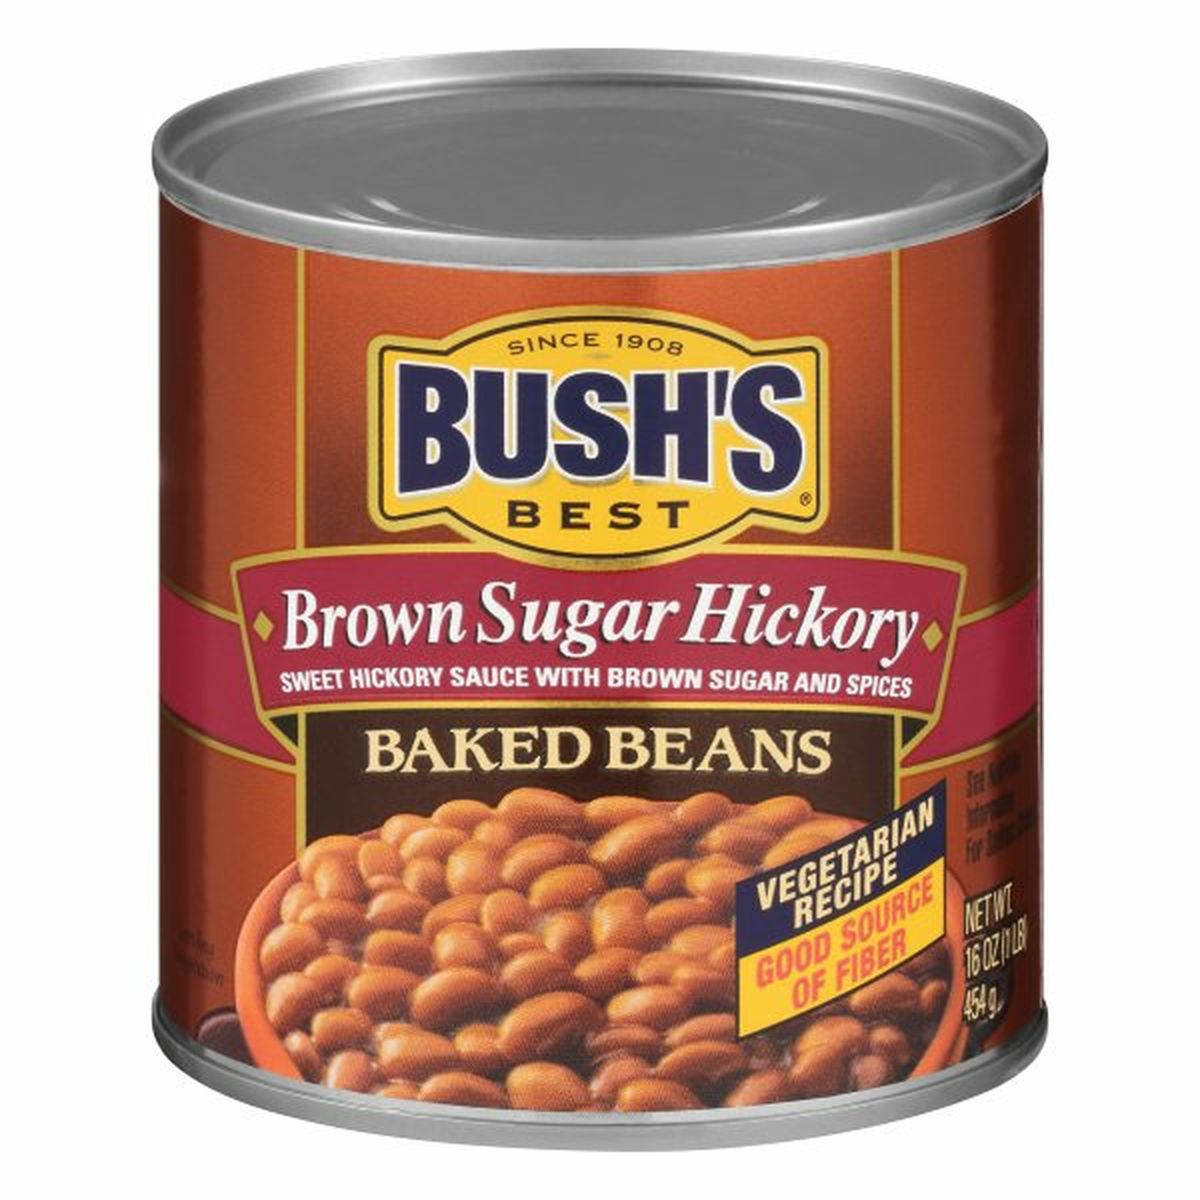 Calories in Bush's Best Baked Beans, Brown Sugar Hickory